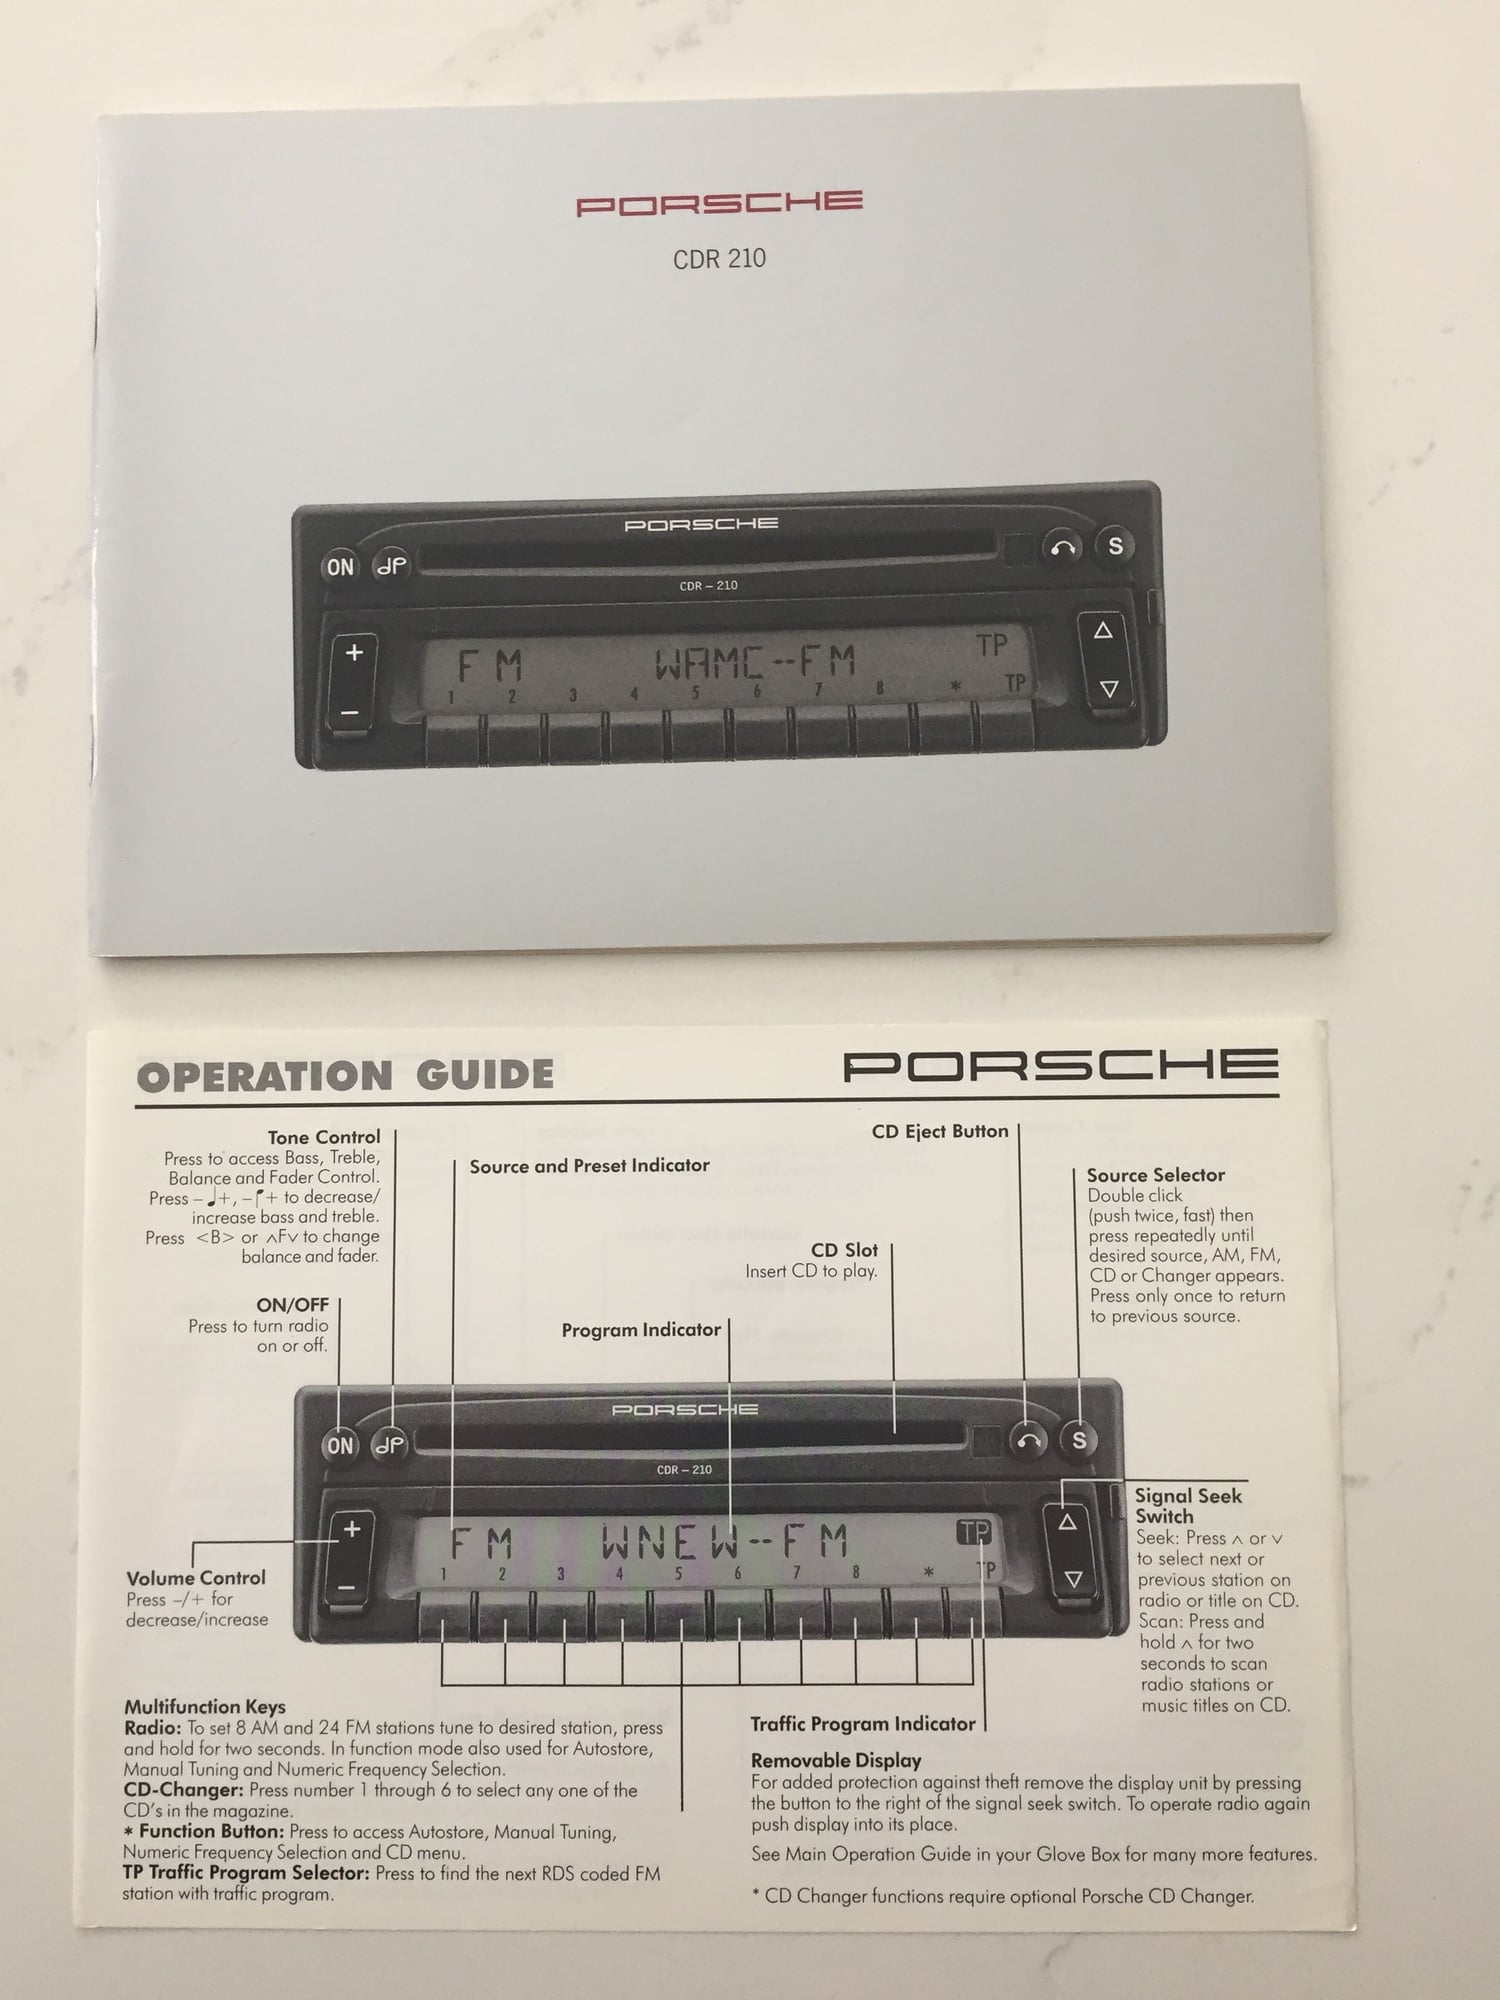 Audio Video/Electronics - Original Becker CDR210 Radio Manual Quick Reference Guide Faceplate Case - Used - 1996 to 1998 Porsche 911 - Wayne, PA 19087, United States